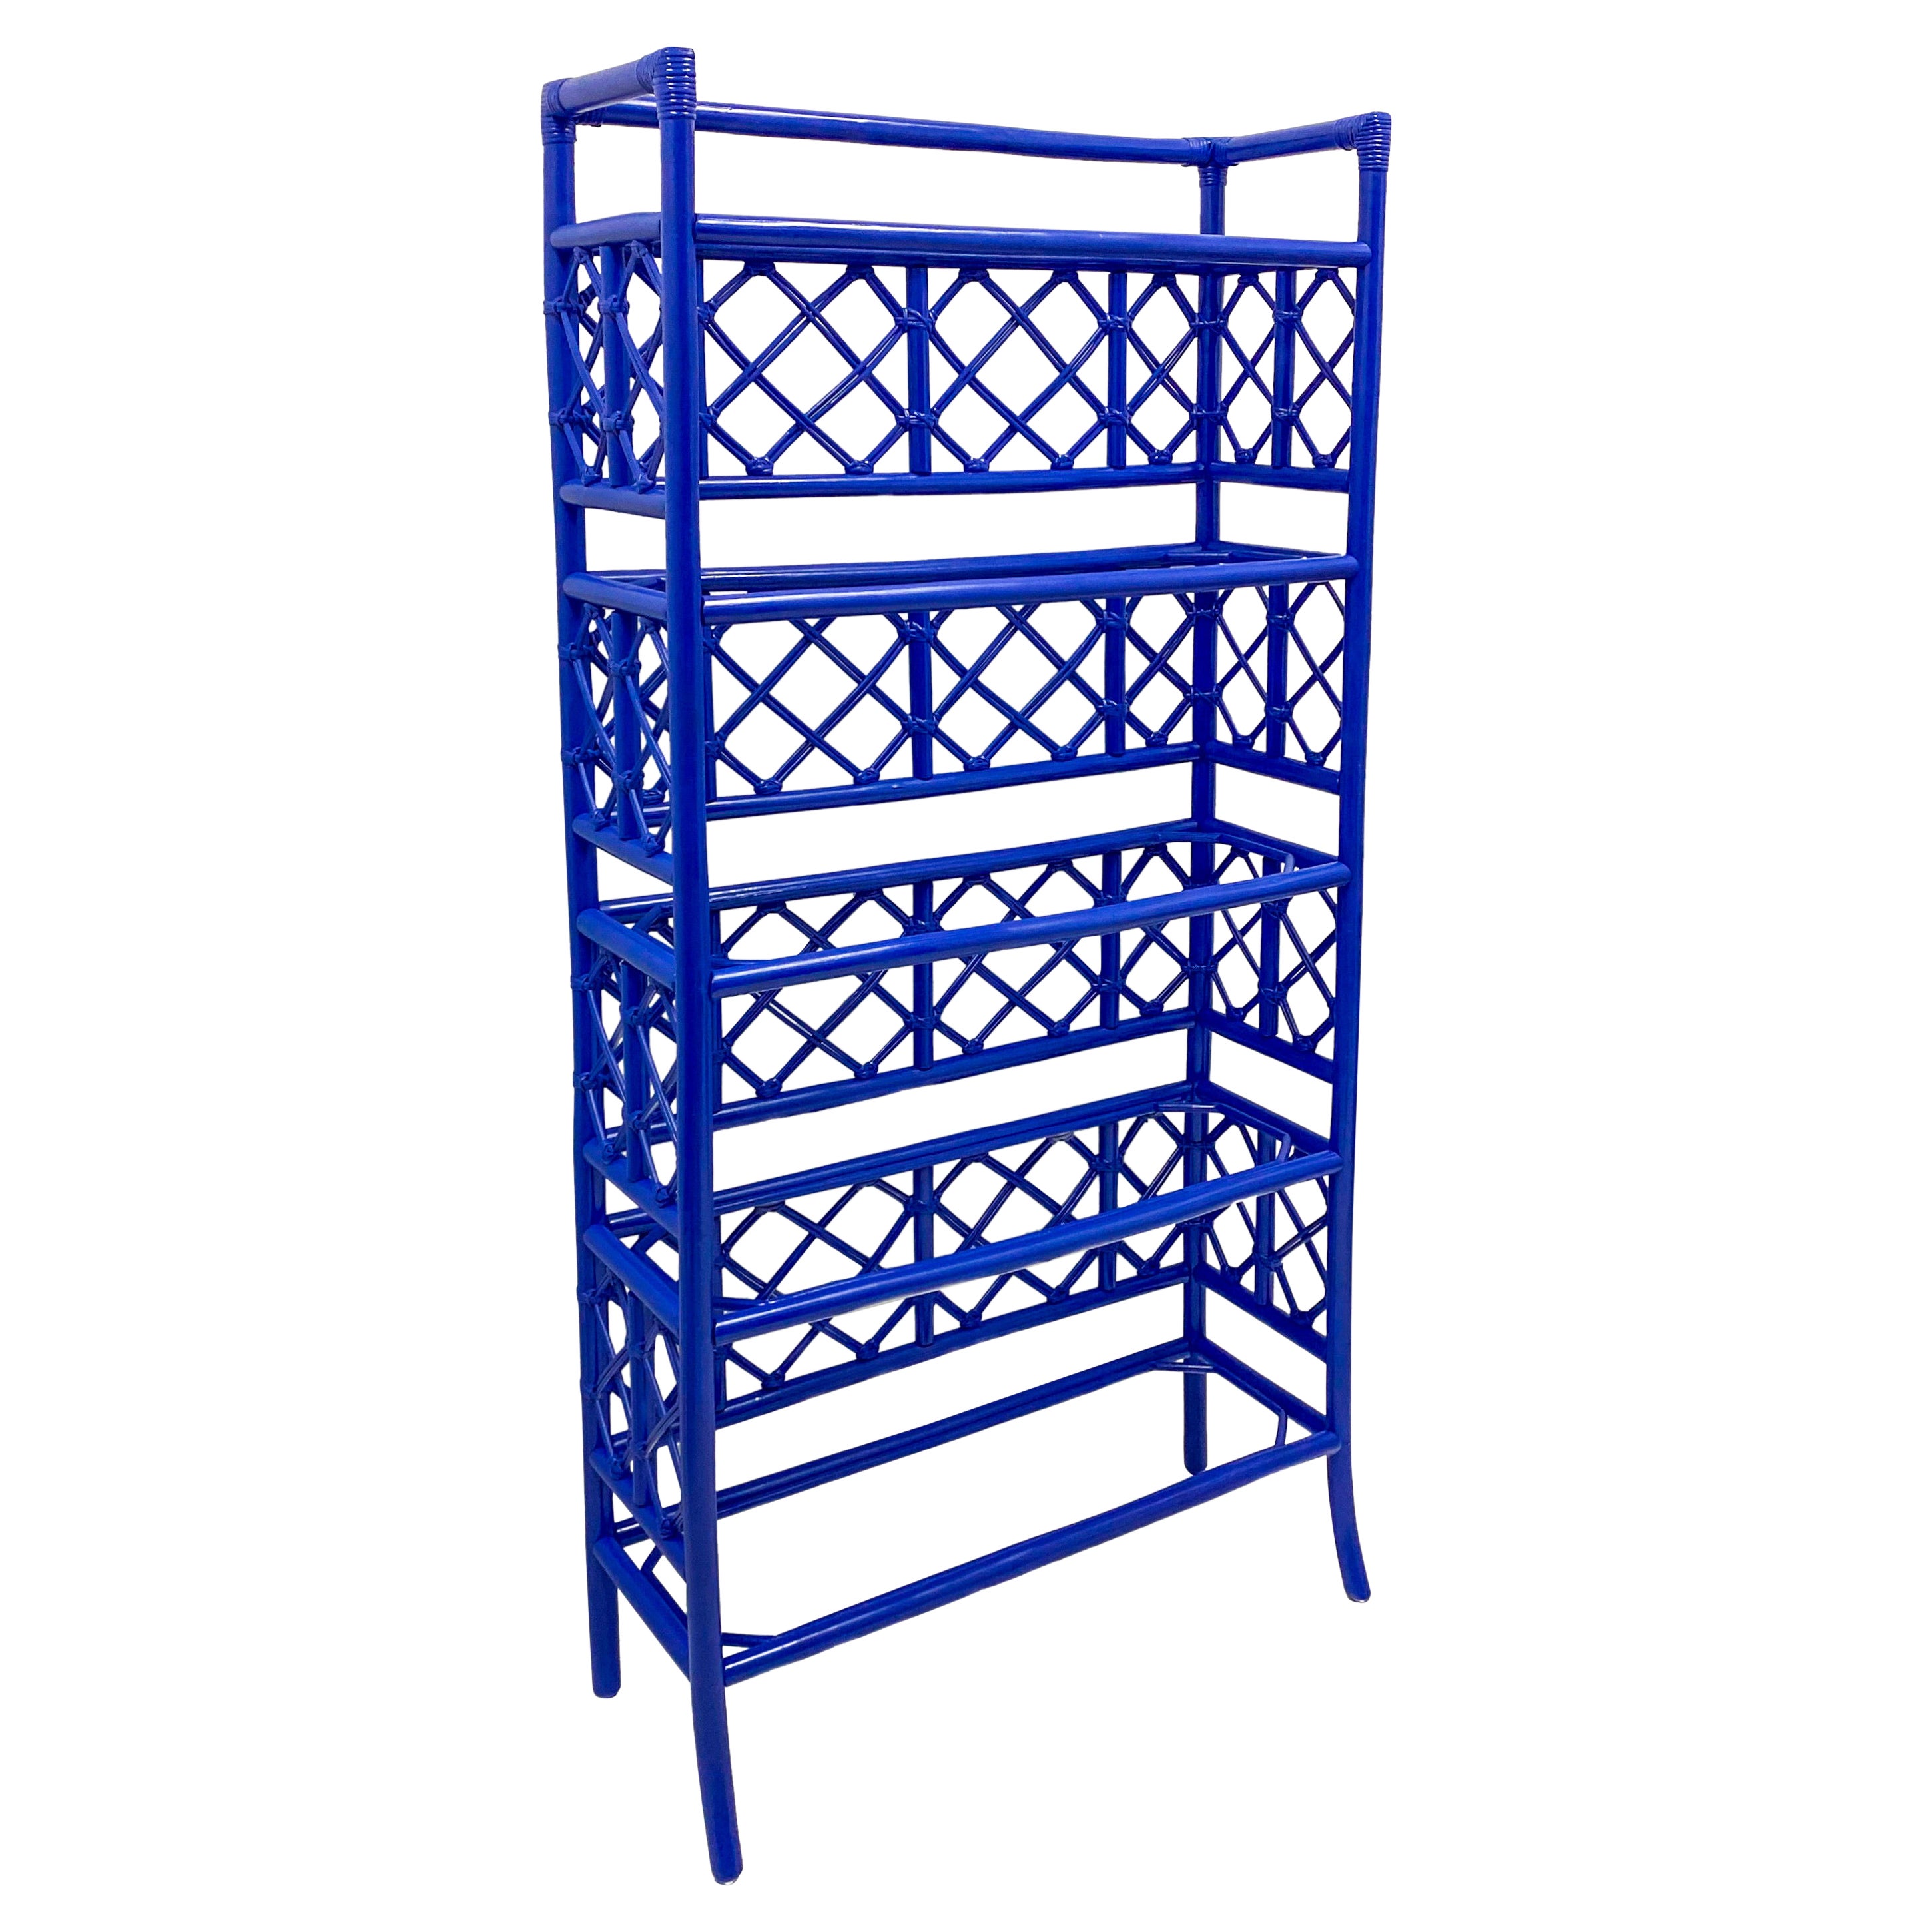 1960s Chippendale Style Blue Painted Rattan Shelf / Etagere by McGuire For Sale